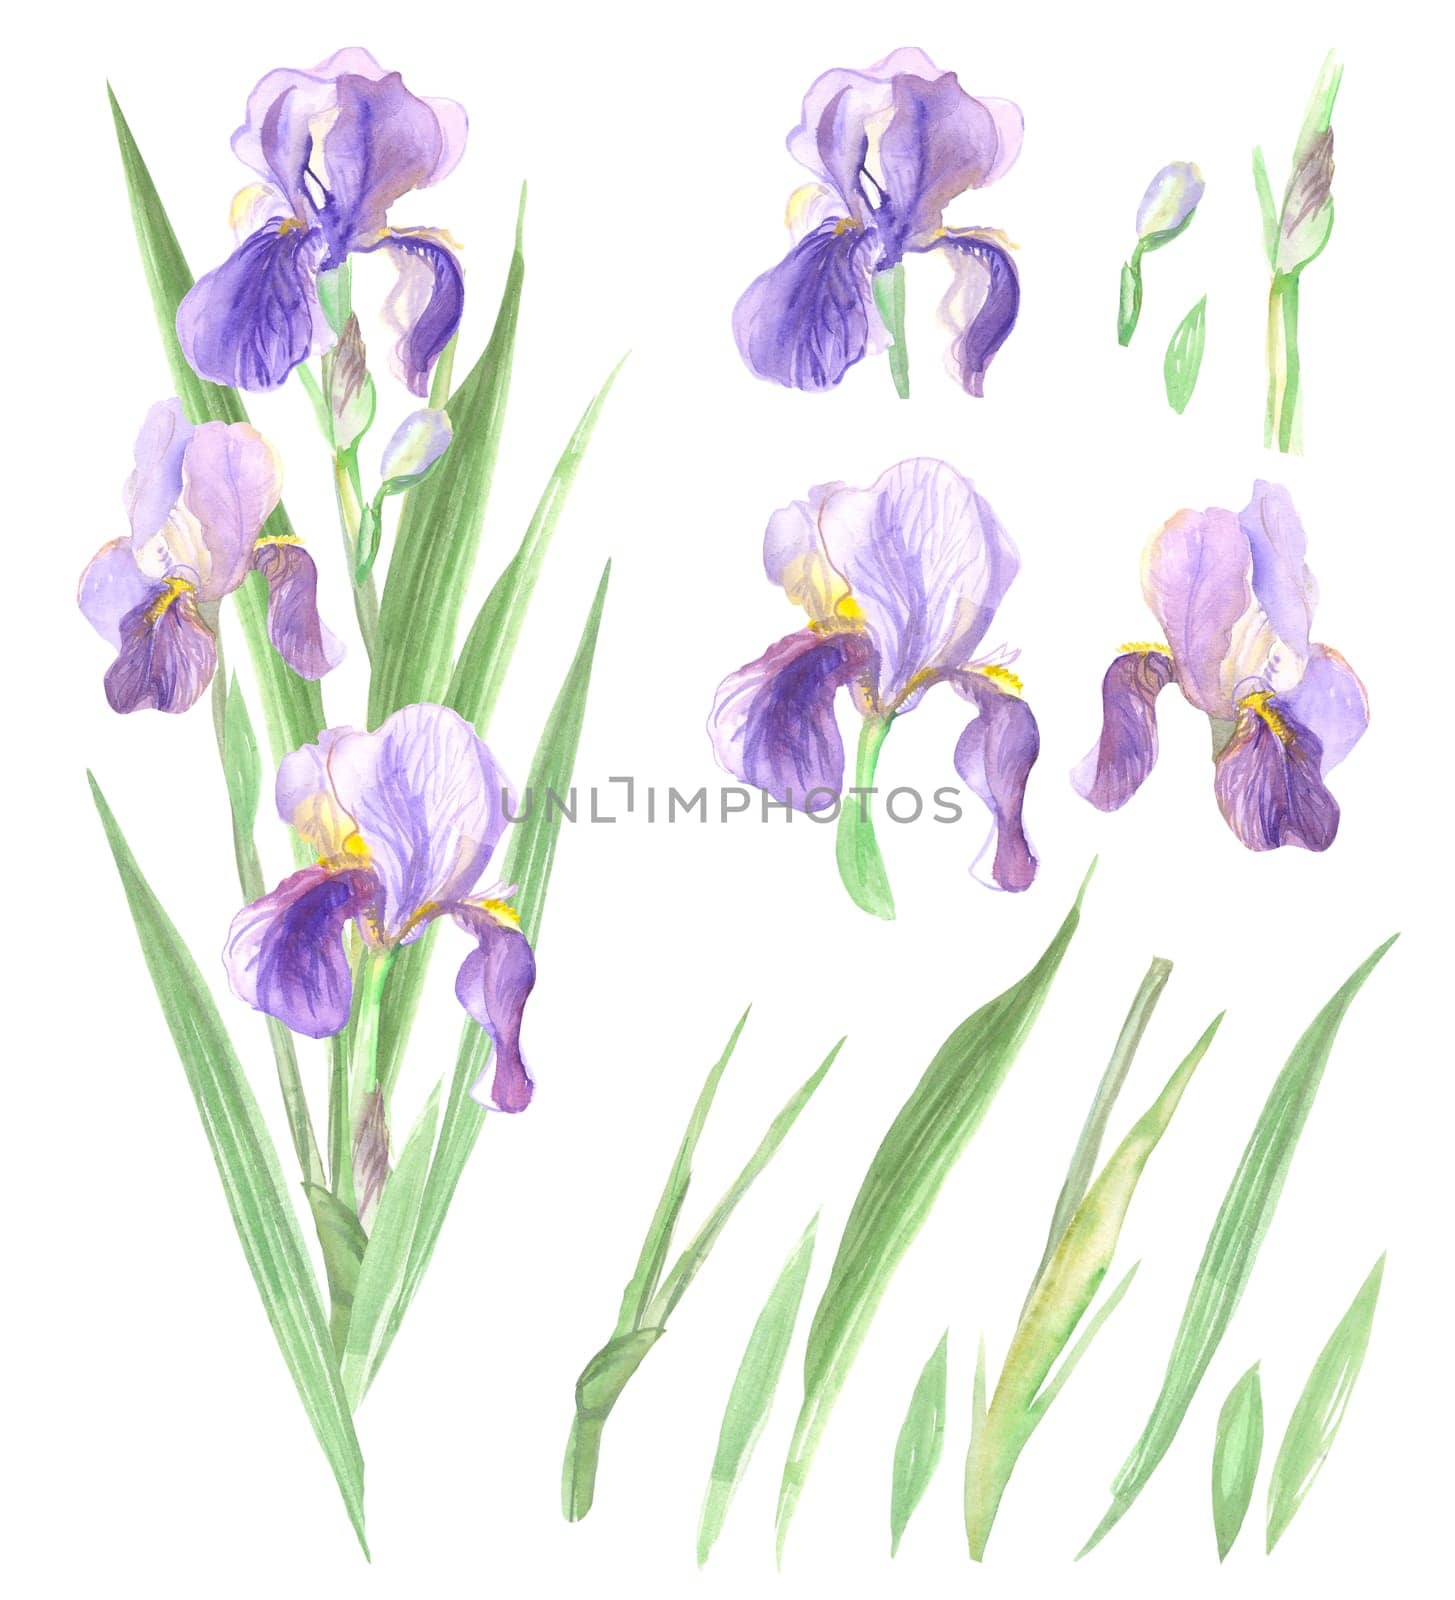 purple irises with green leaves are folded into an elegant bouquet and arranged next to the elements separately: flowers, branches, leaves, Bud